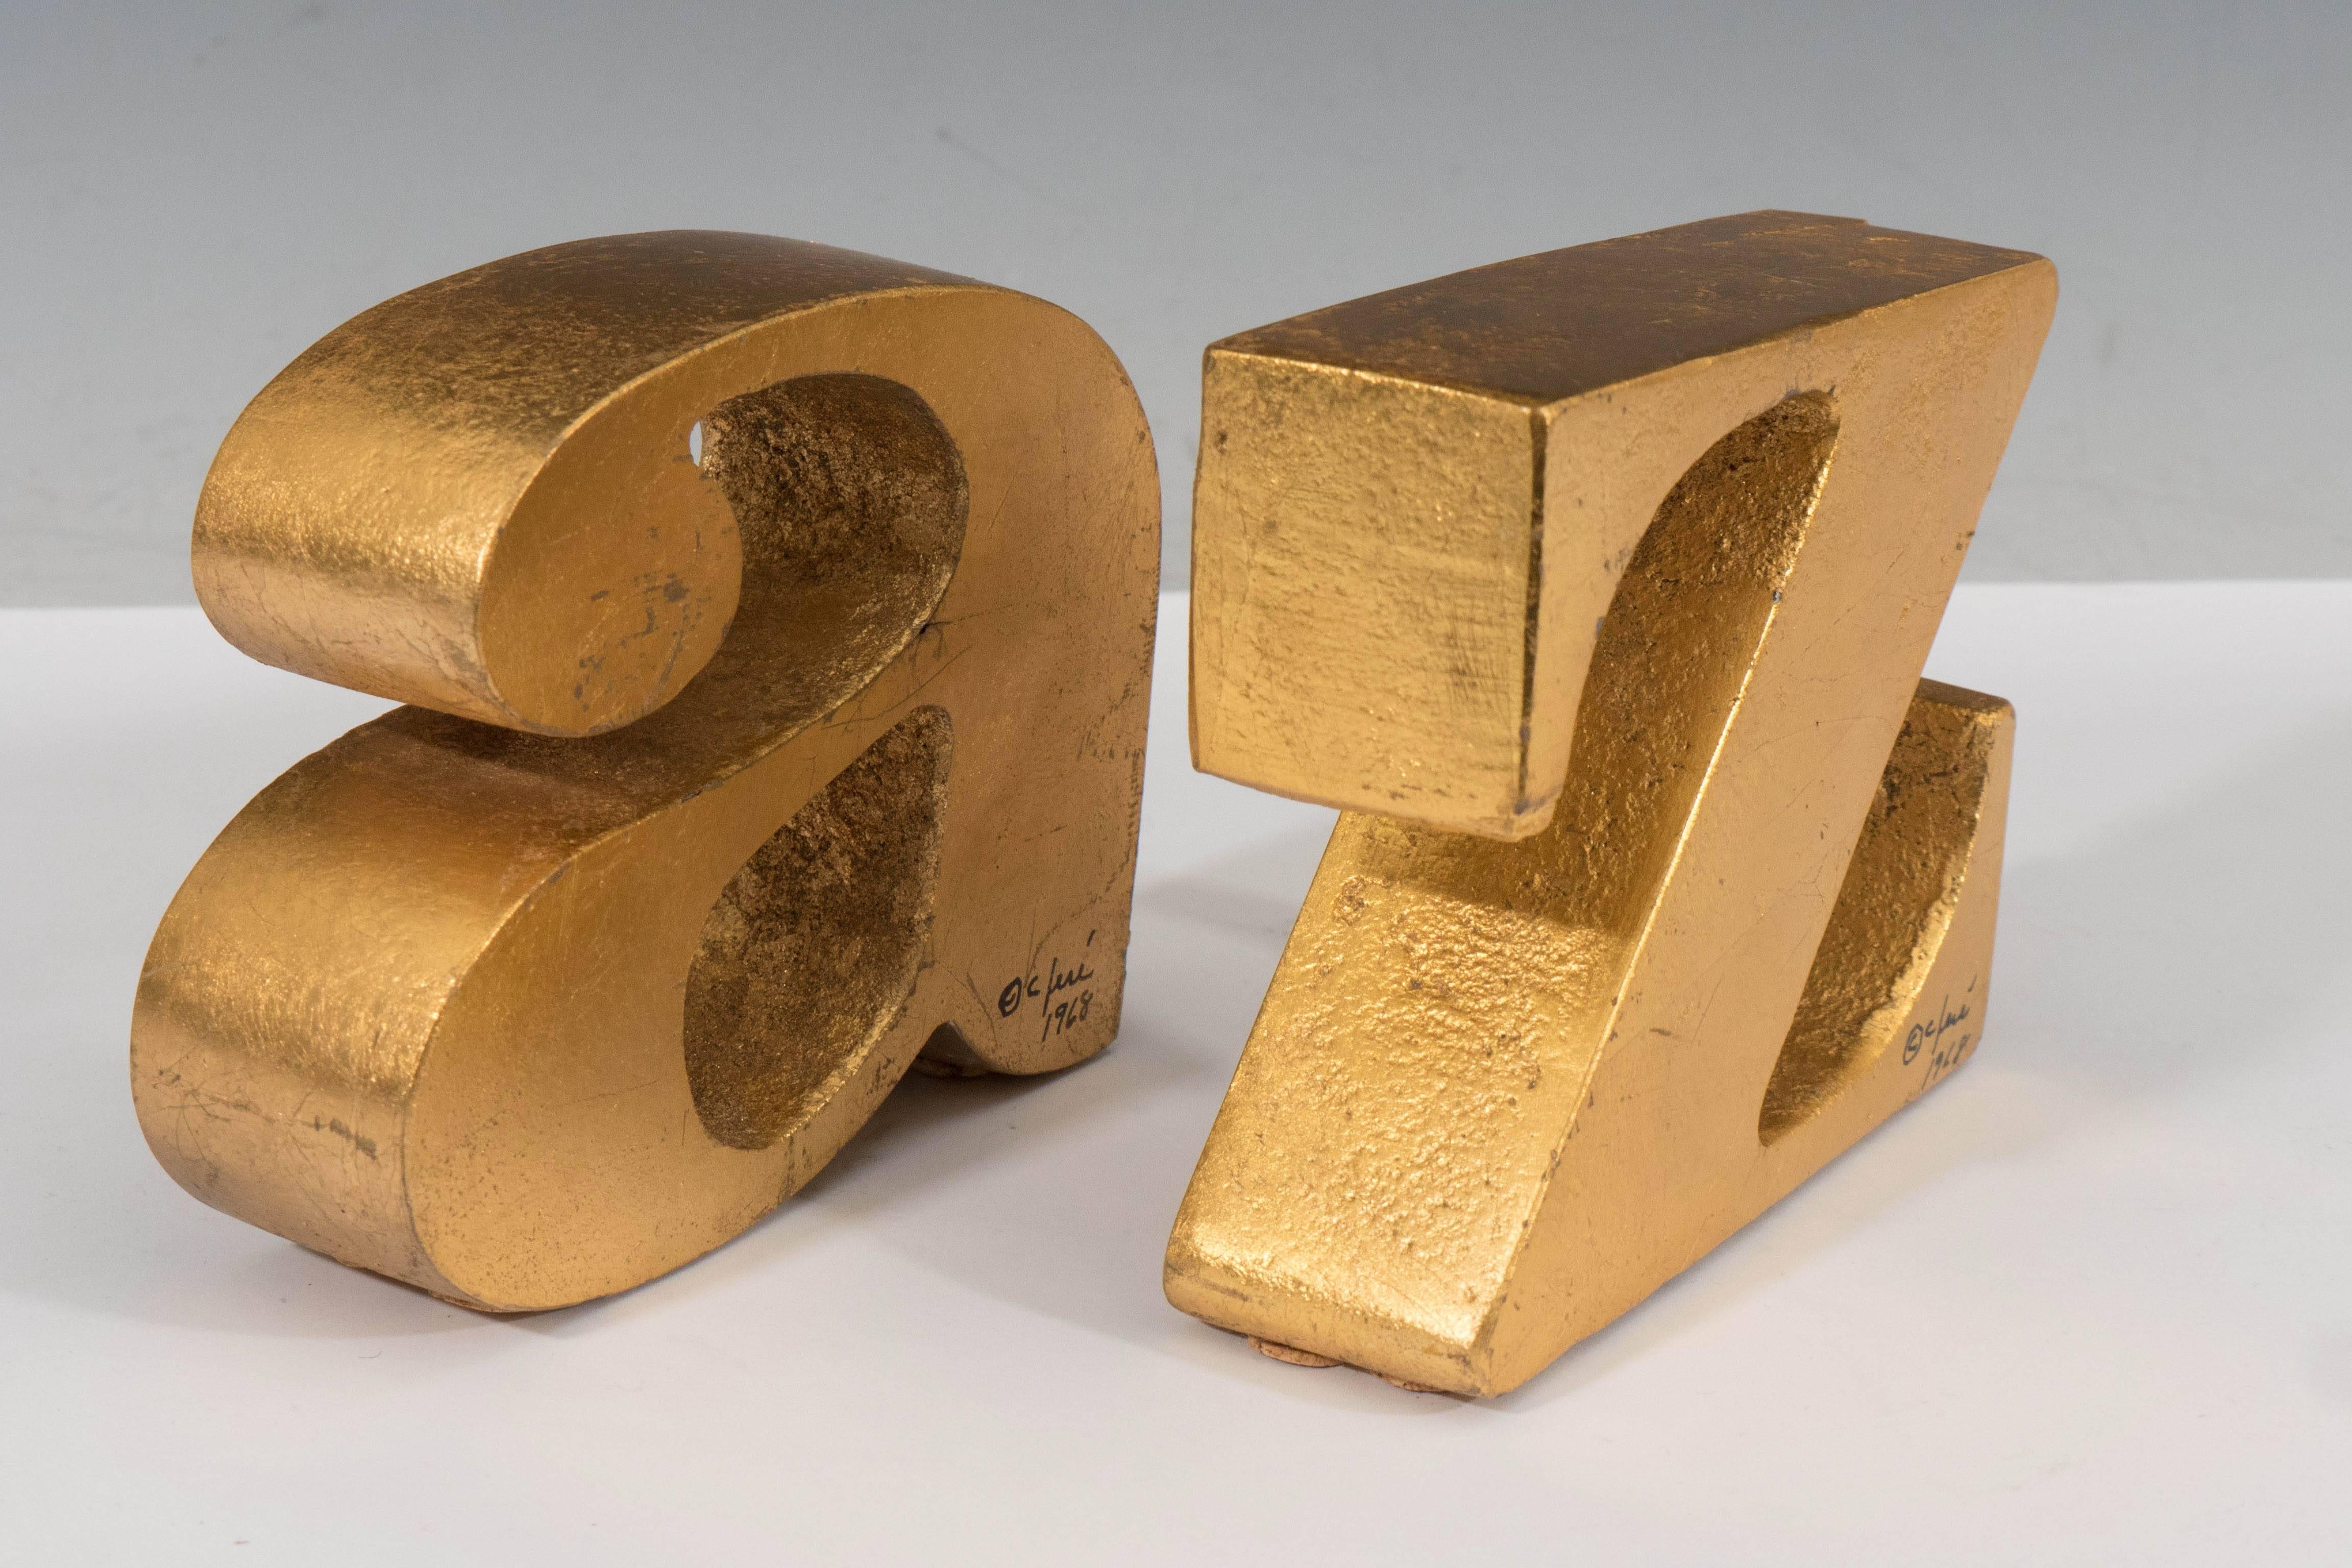 Pair of Mid-Century a/z Gold Gilt Metal Bookends by Curtis Jere Signed and Dated 2